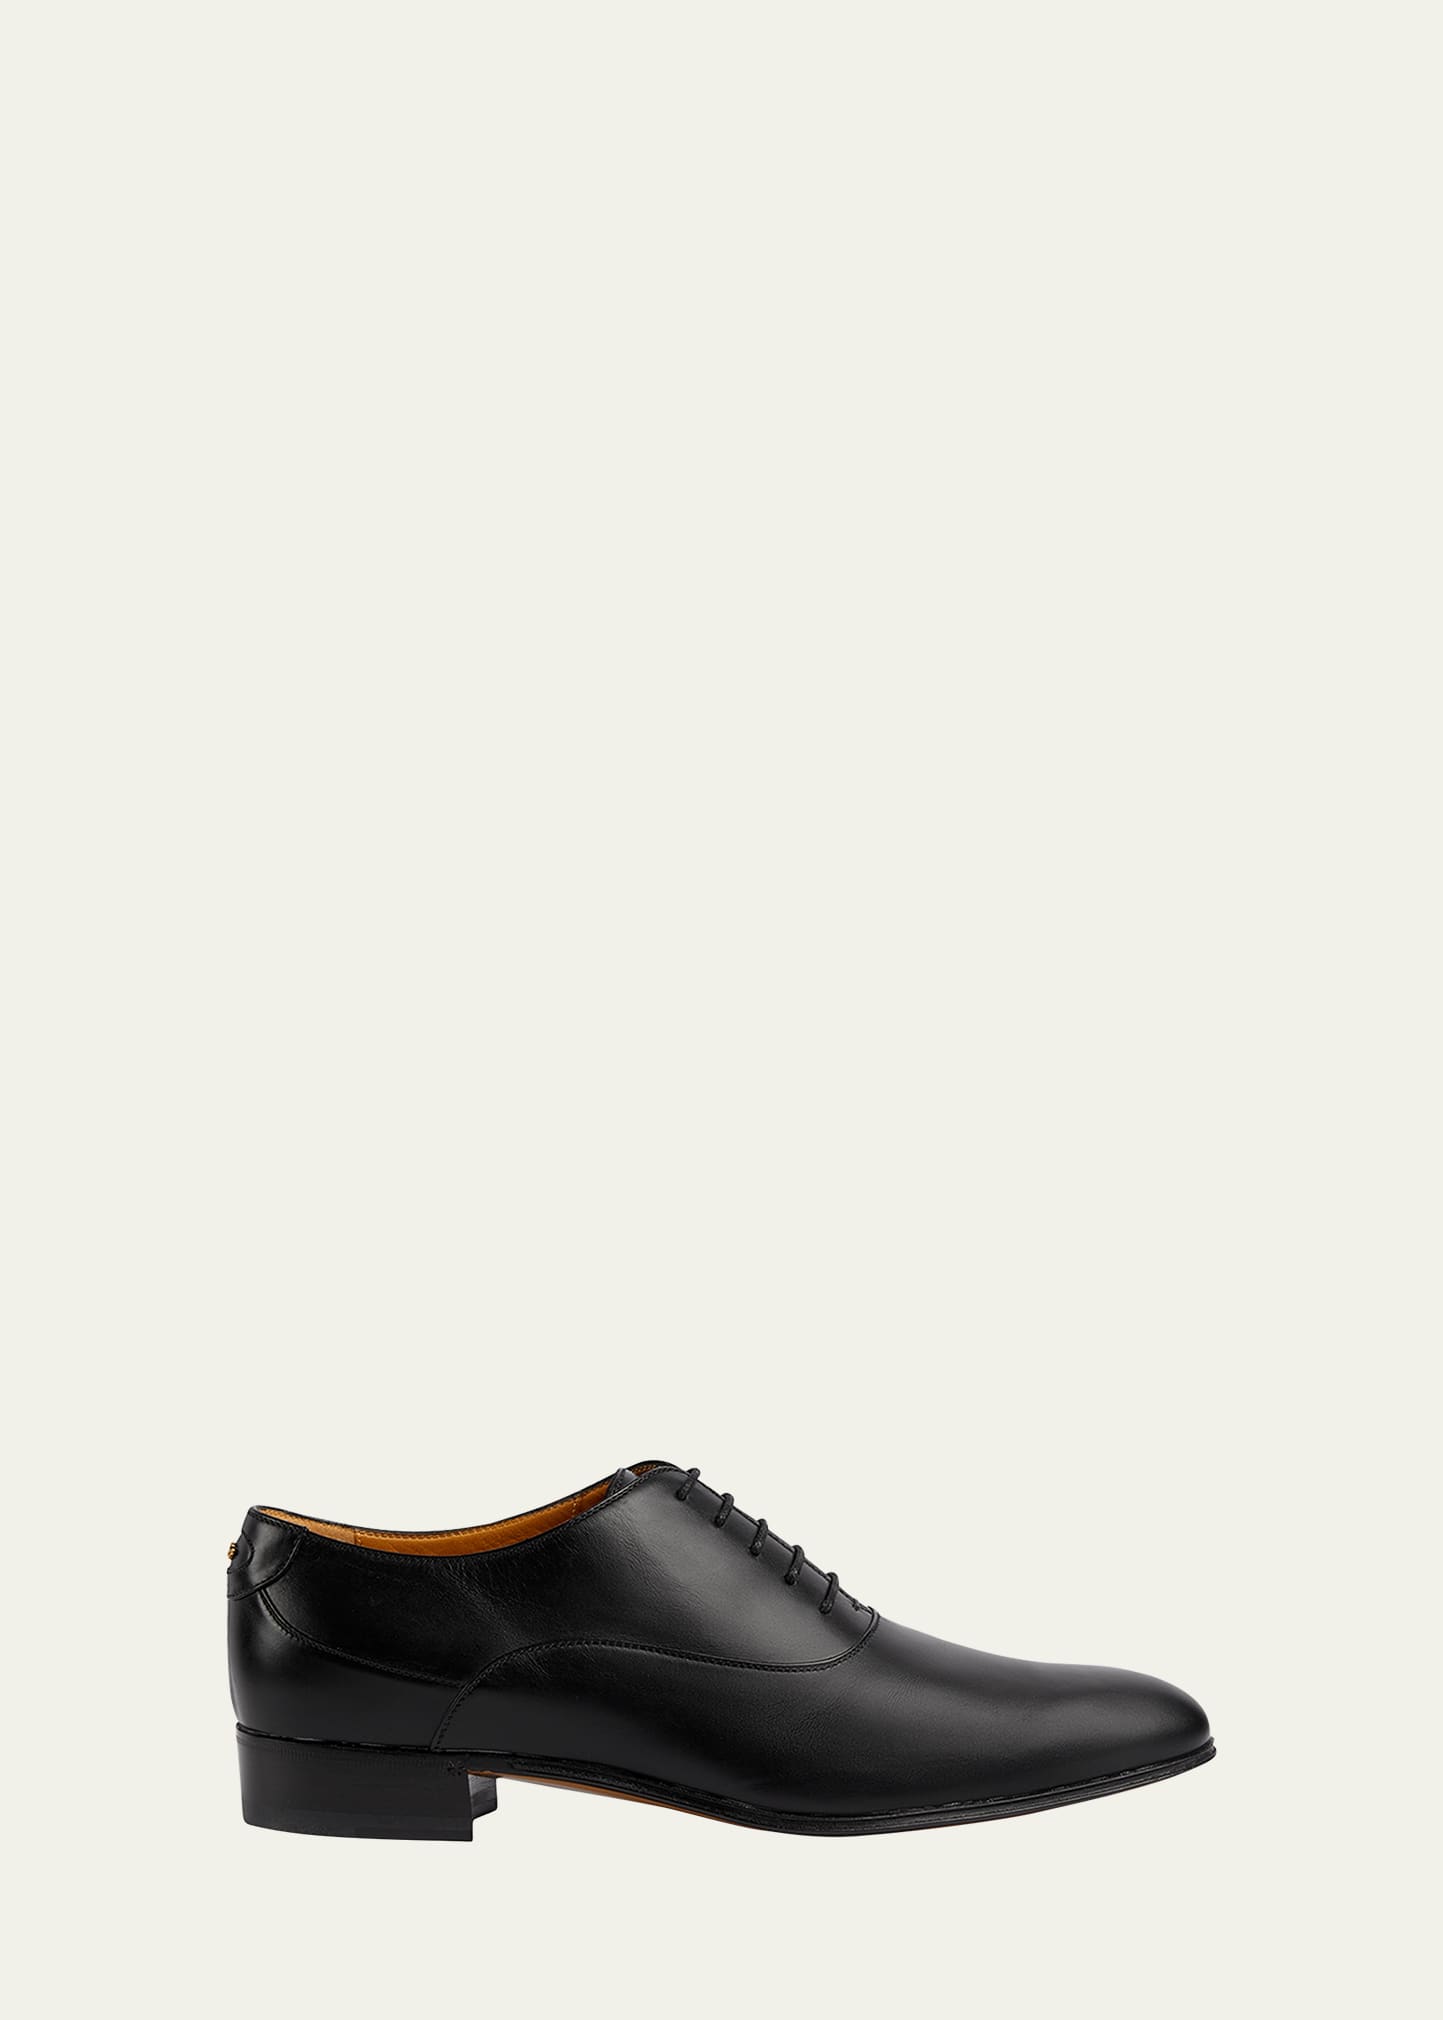 Men's Adel Double G Leather Oxfords